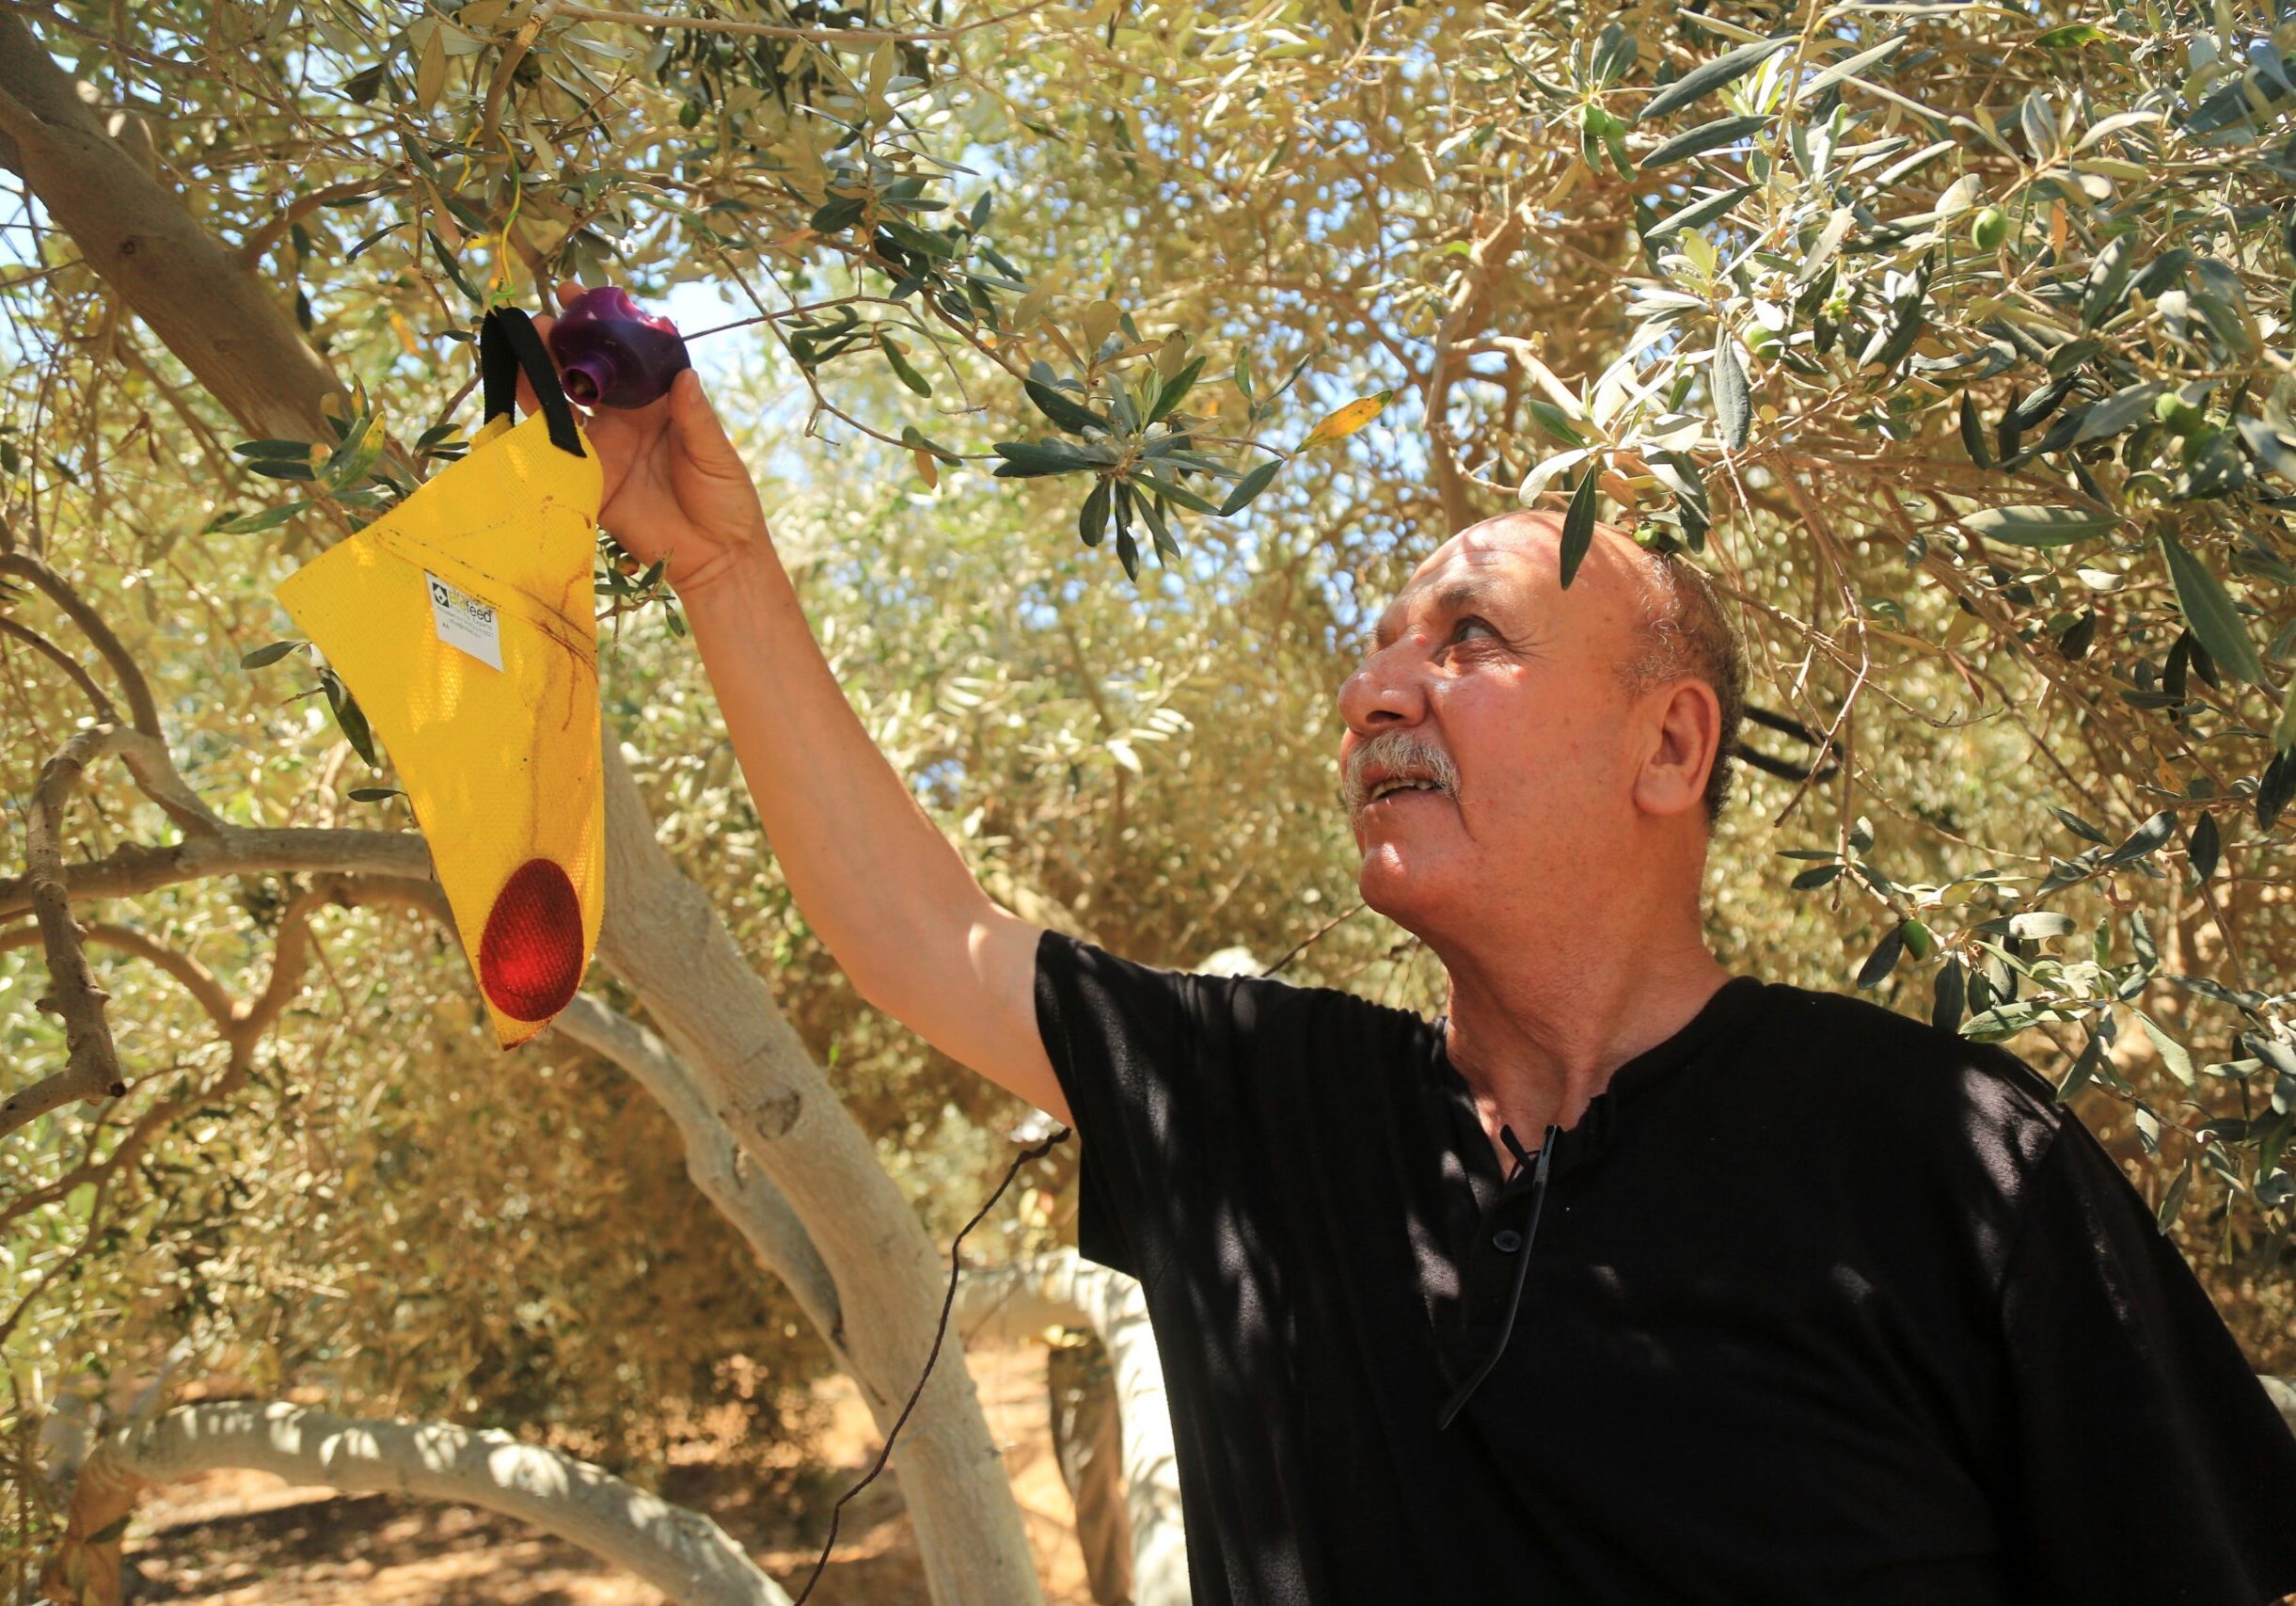 Gaza Strip. An engineer checking on an insect trap given to him as part of an eco-friendly project for the protection of fruit and olive trees, supported by the ICRC.